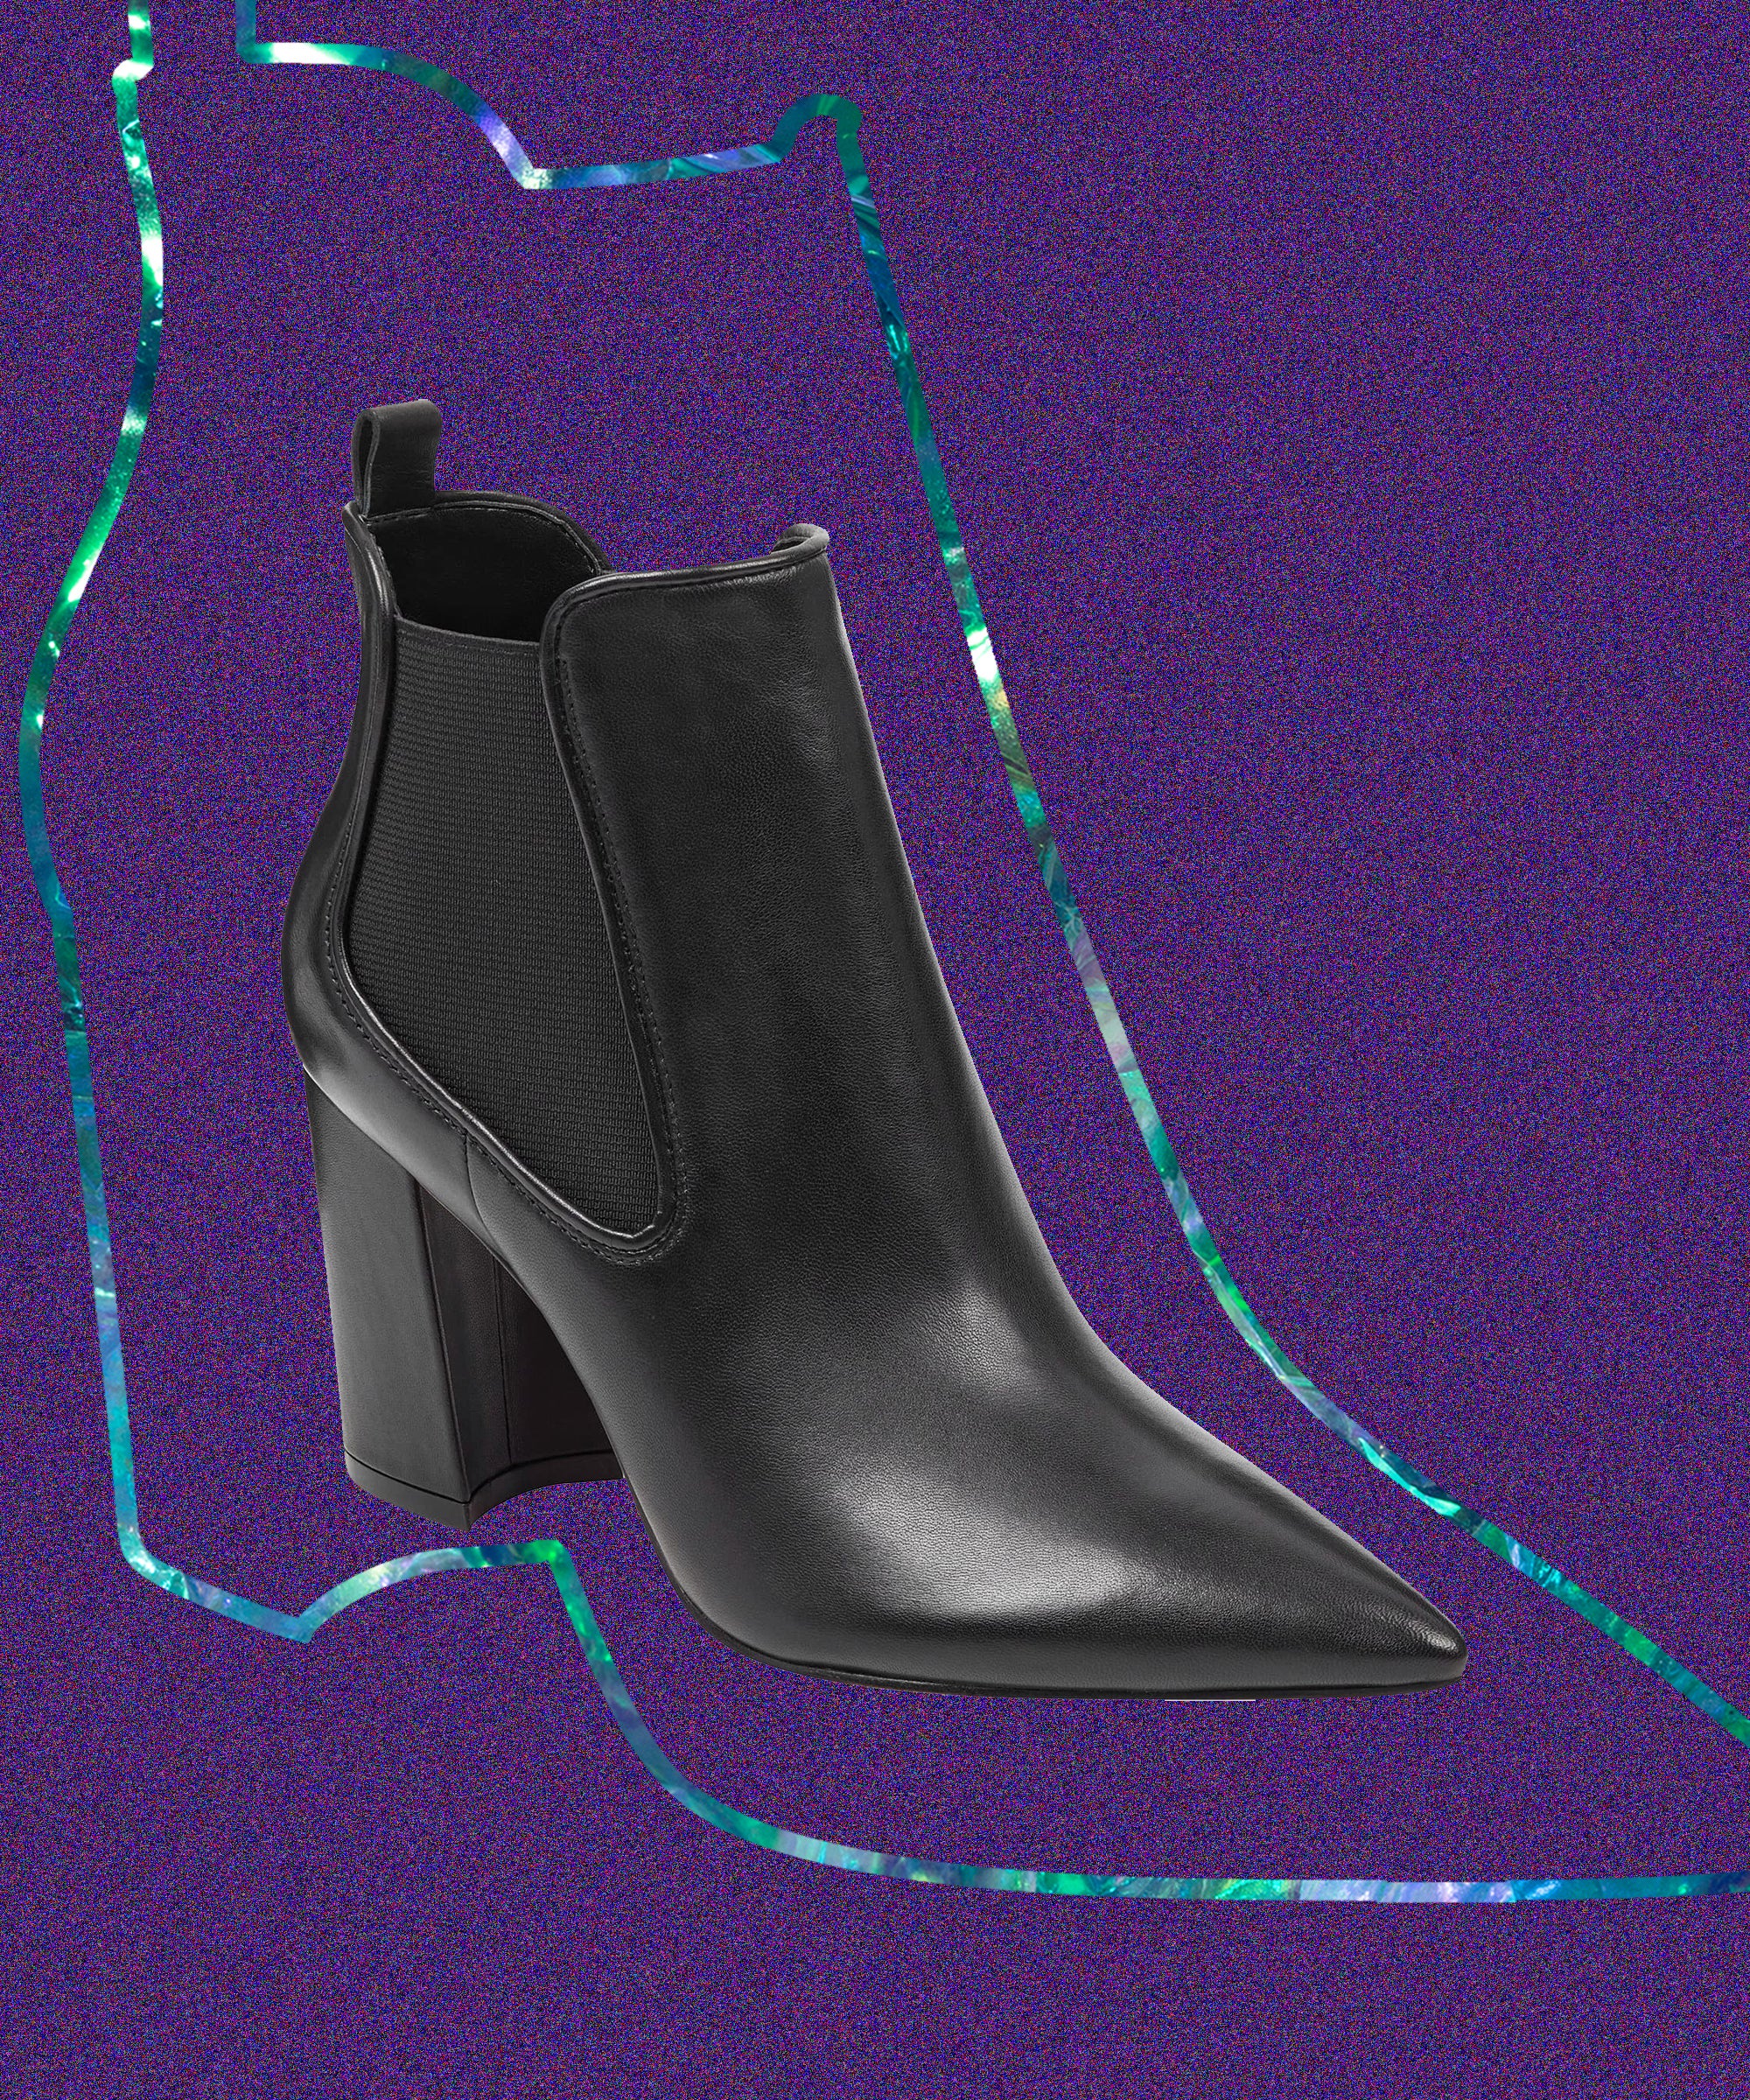 chelsea boots black friday sale